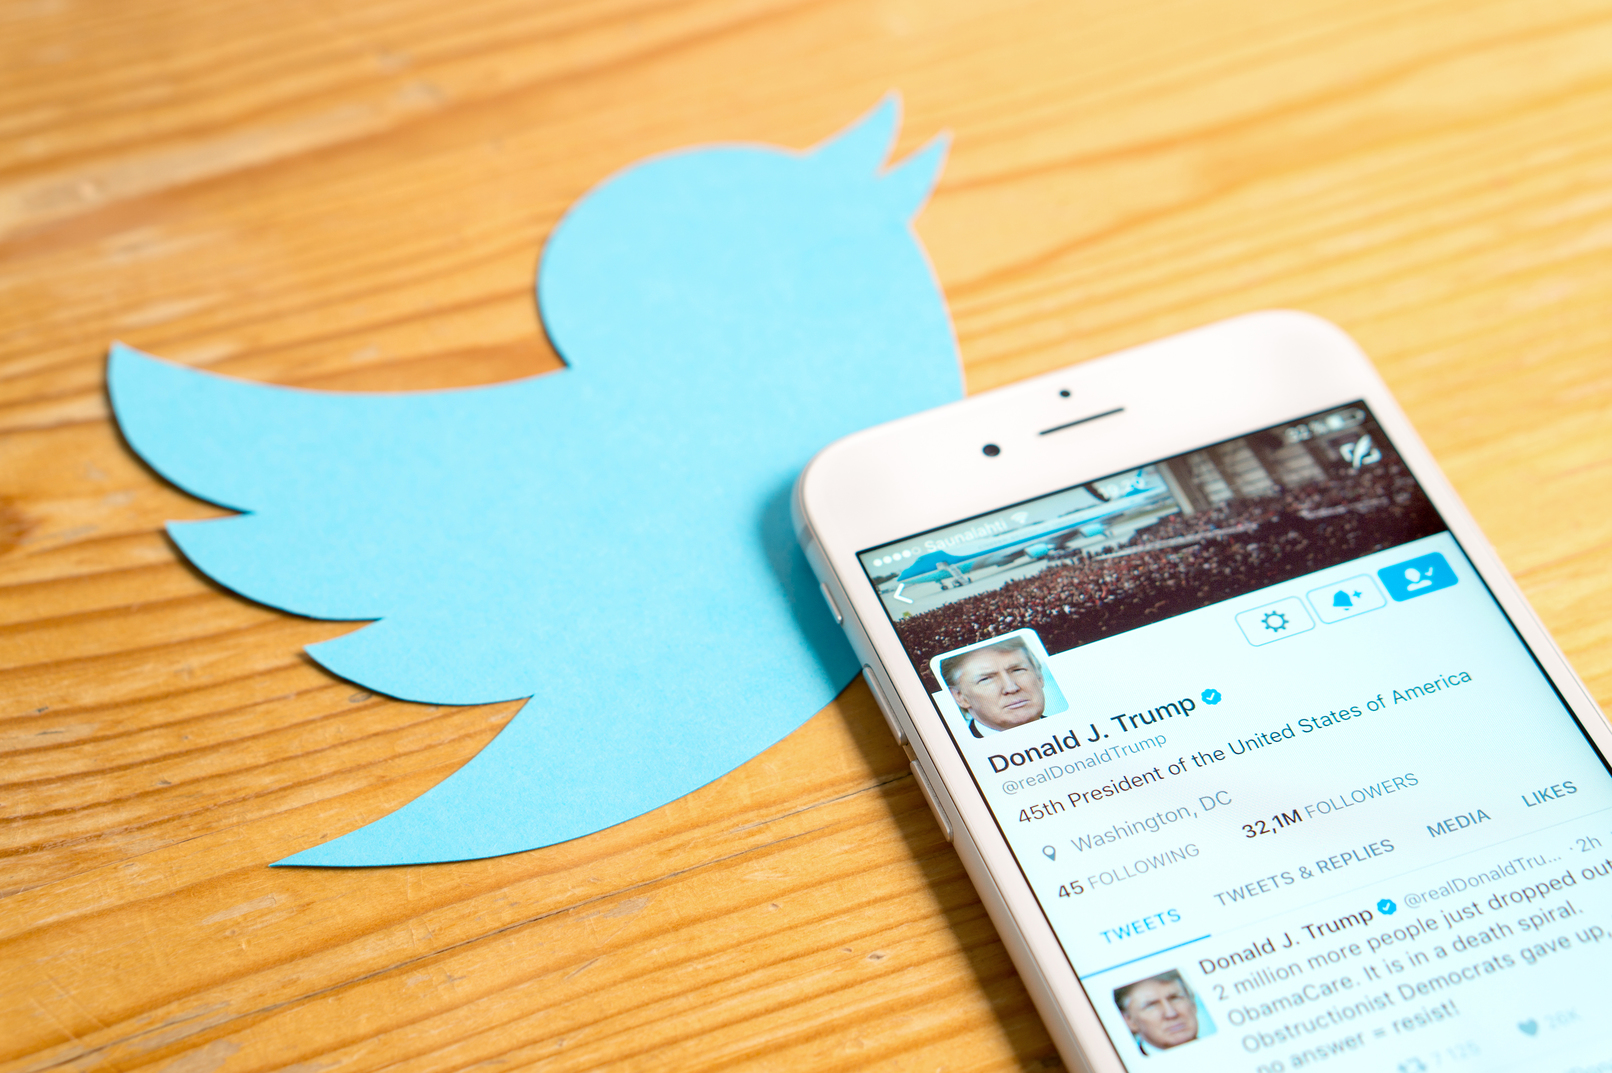 U.S. Court of Appeals for the Second Circuit Holds President Donald J. Trump Violated First Amendment by Blocking Users From Accessing Twitter Account